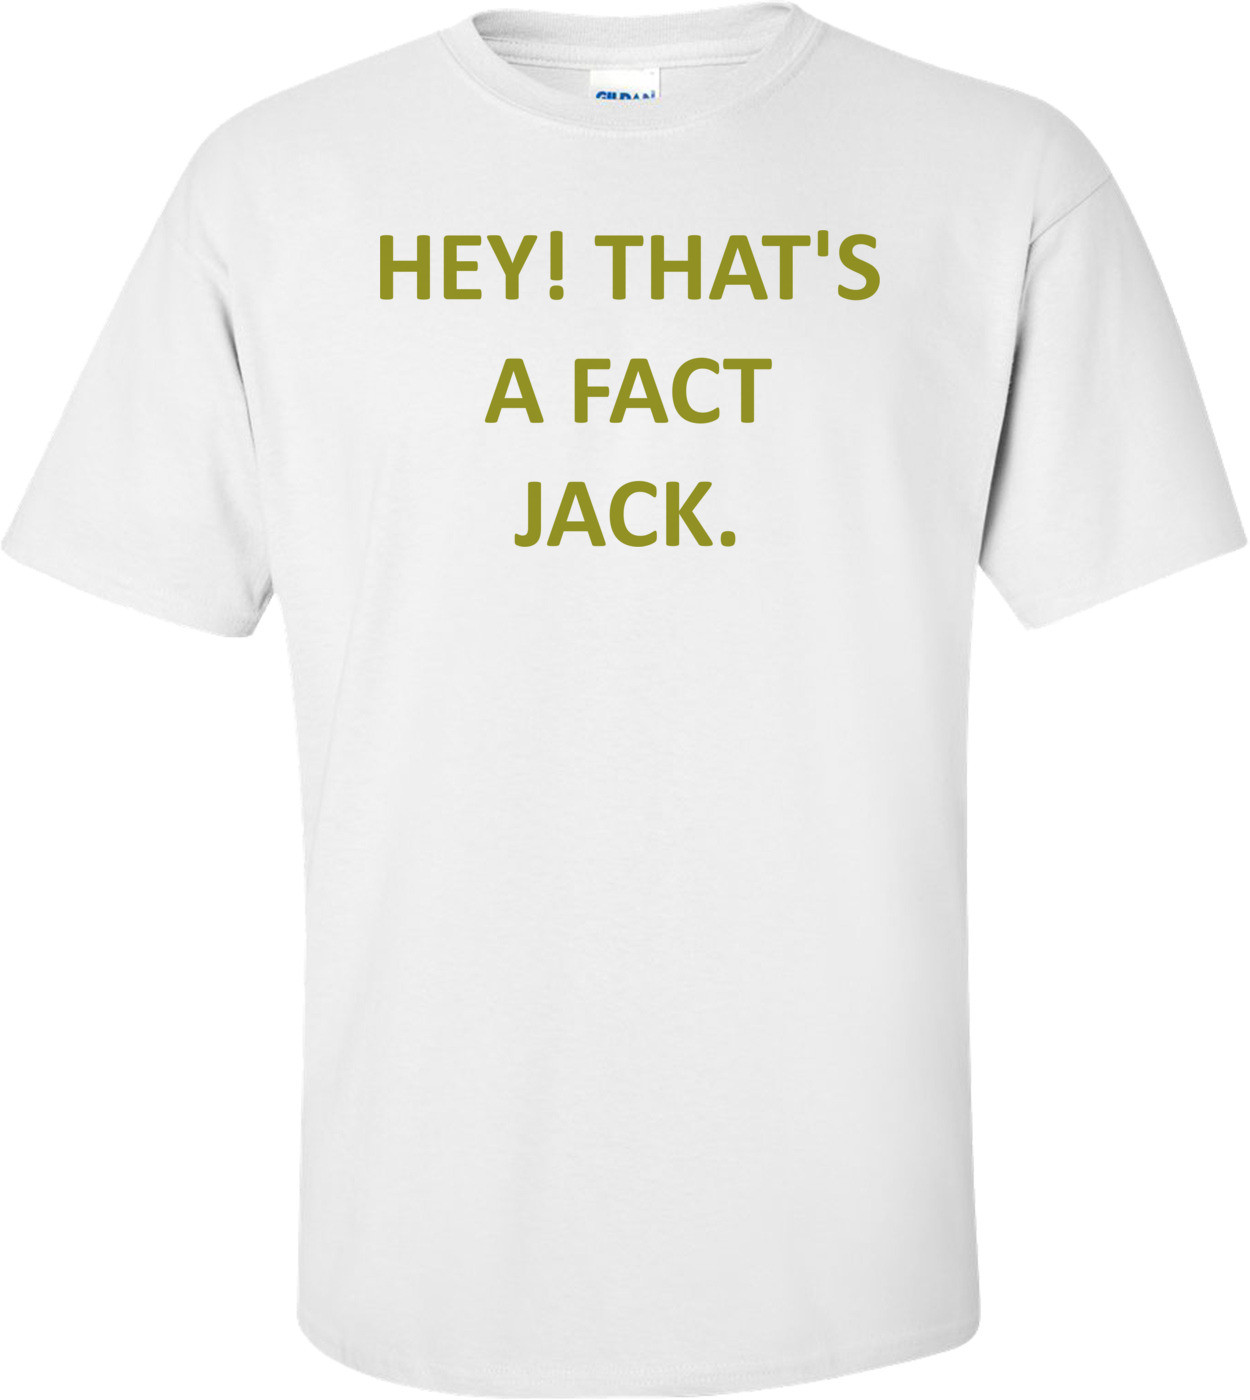 HEY! THAT'S A FACT JACK. Shirt